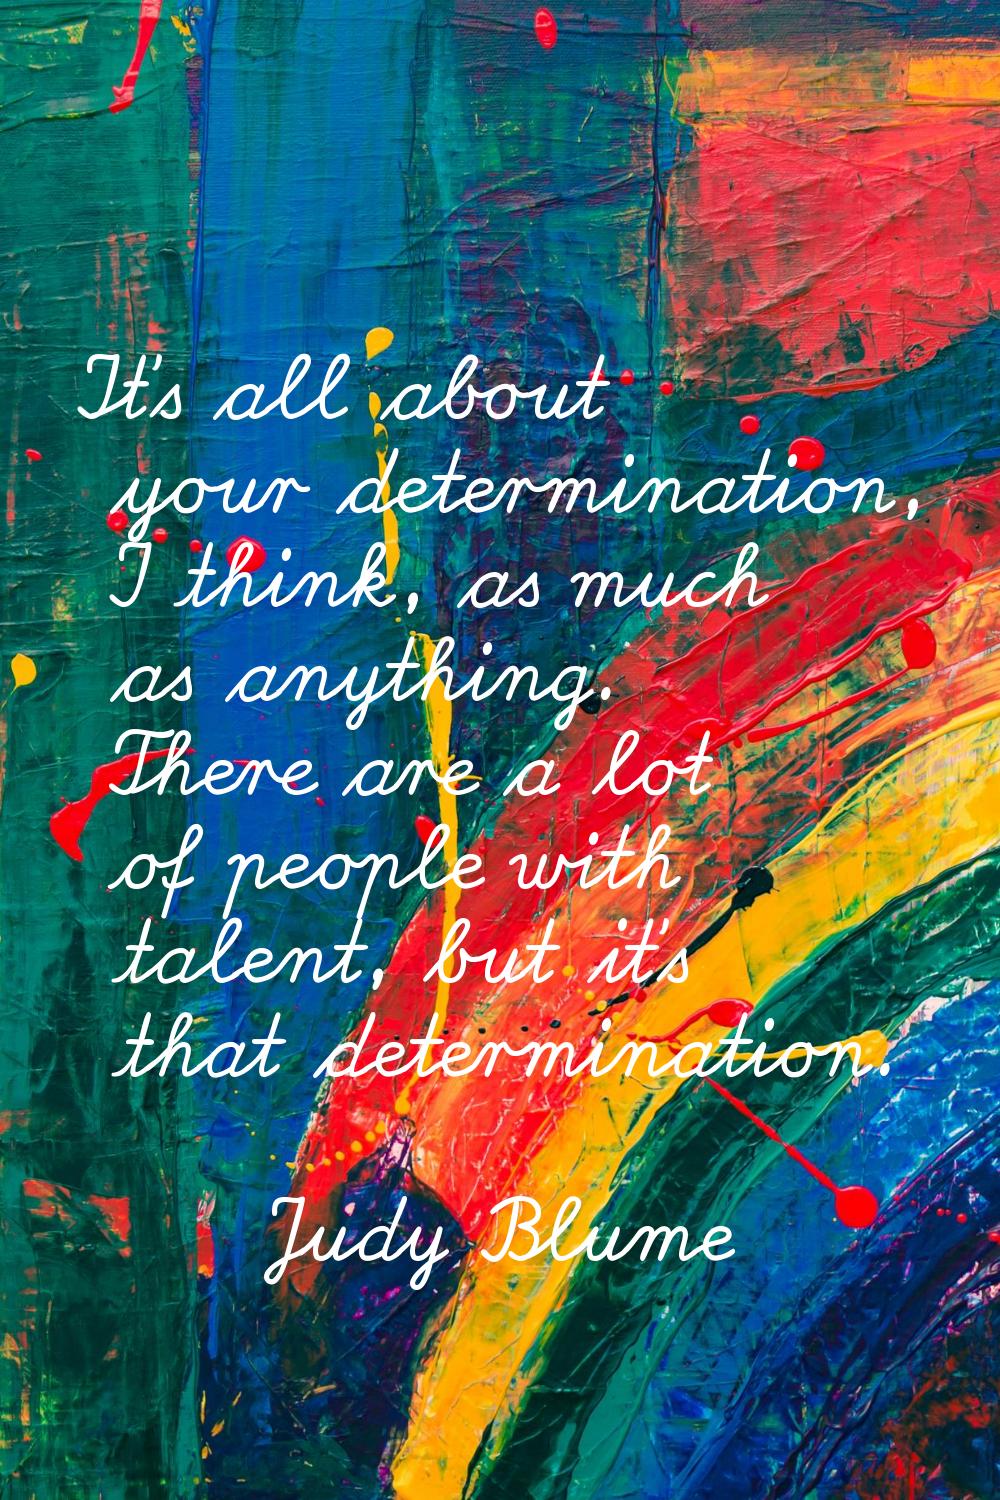 It's all about your determination, I think, as much as anything. There are a lot of people with tal